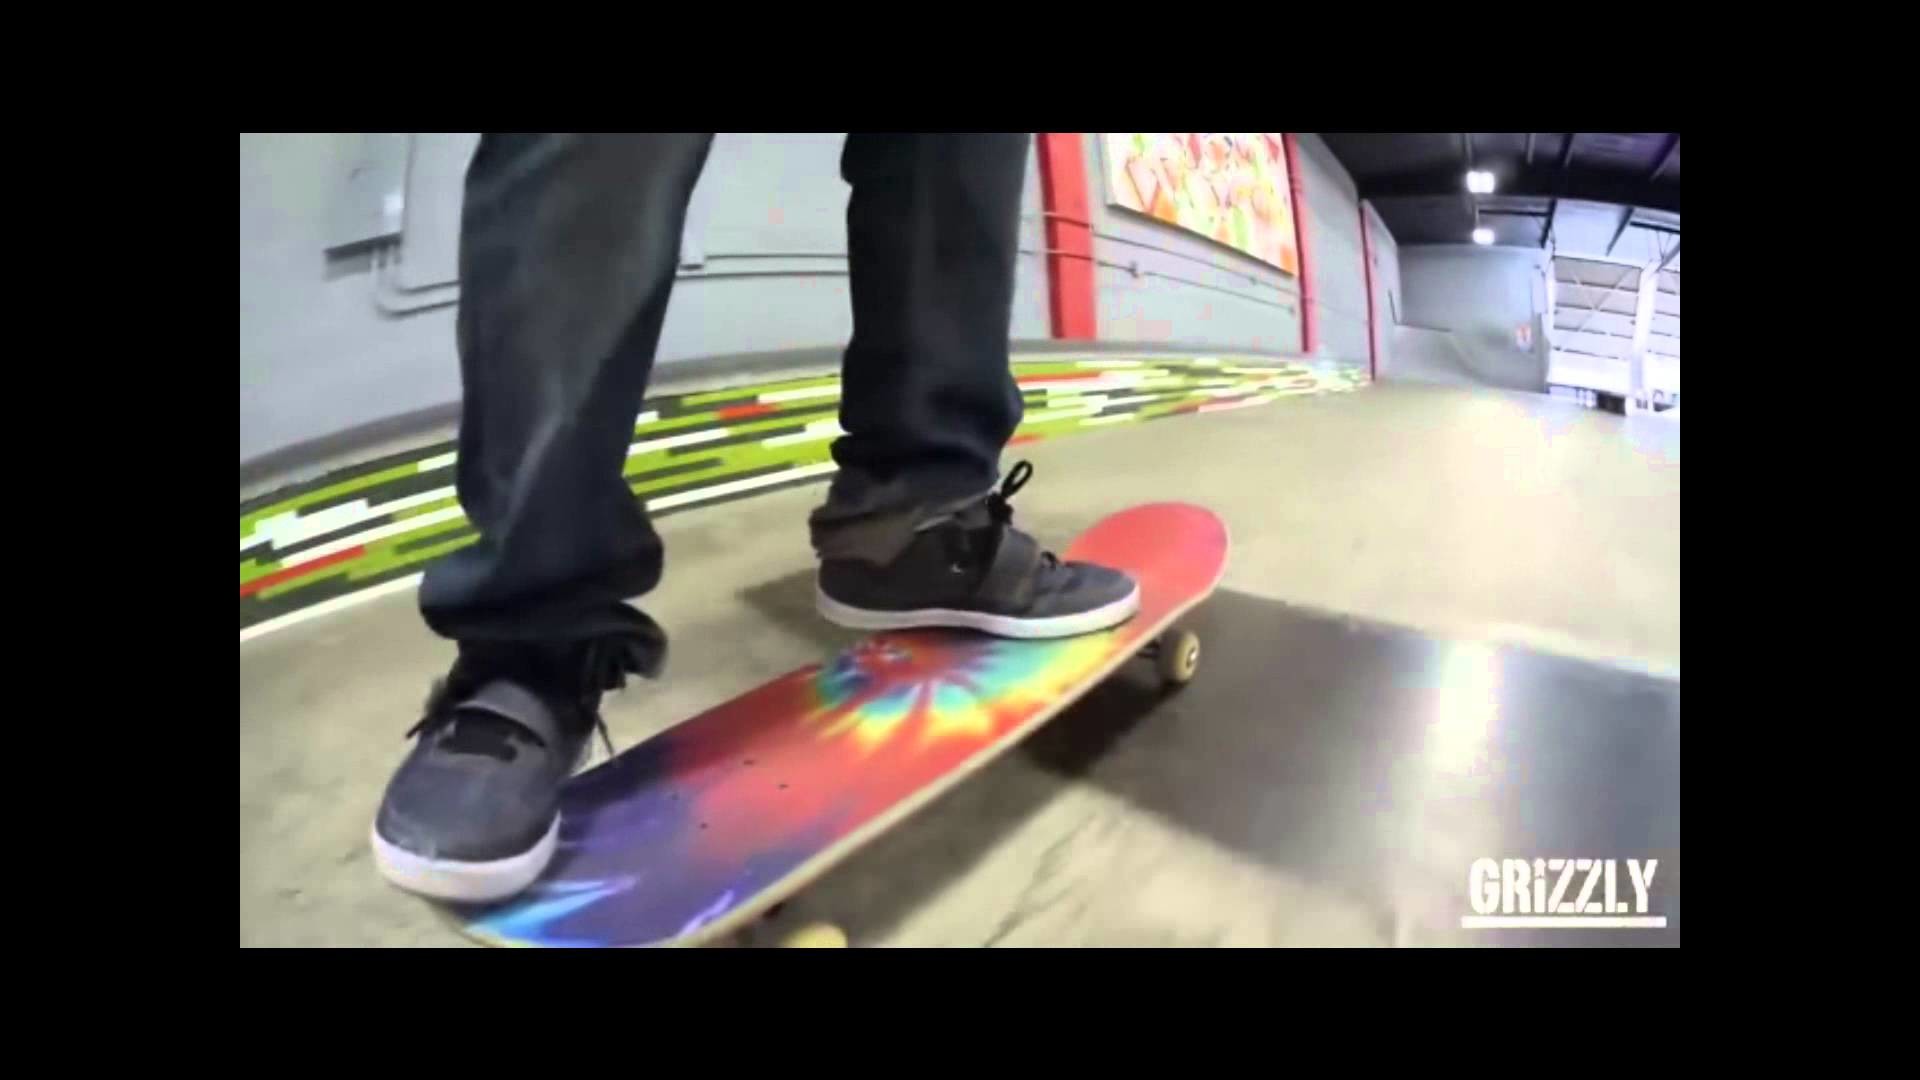 GRIZZLY Torey Pudwill Grizzly Griptape Tie Dye Commercial